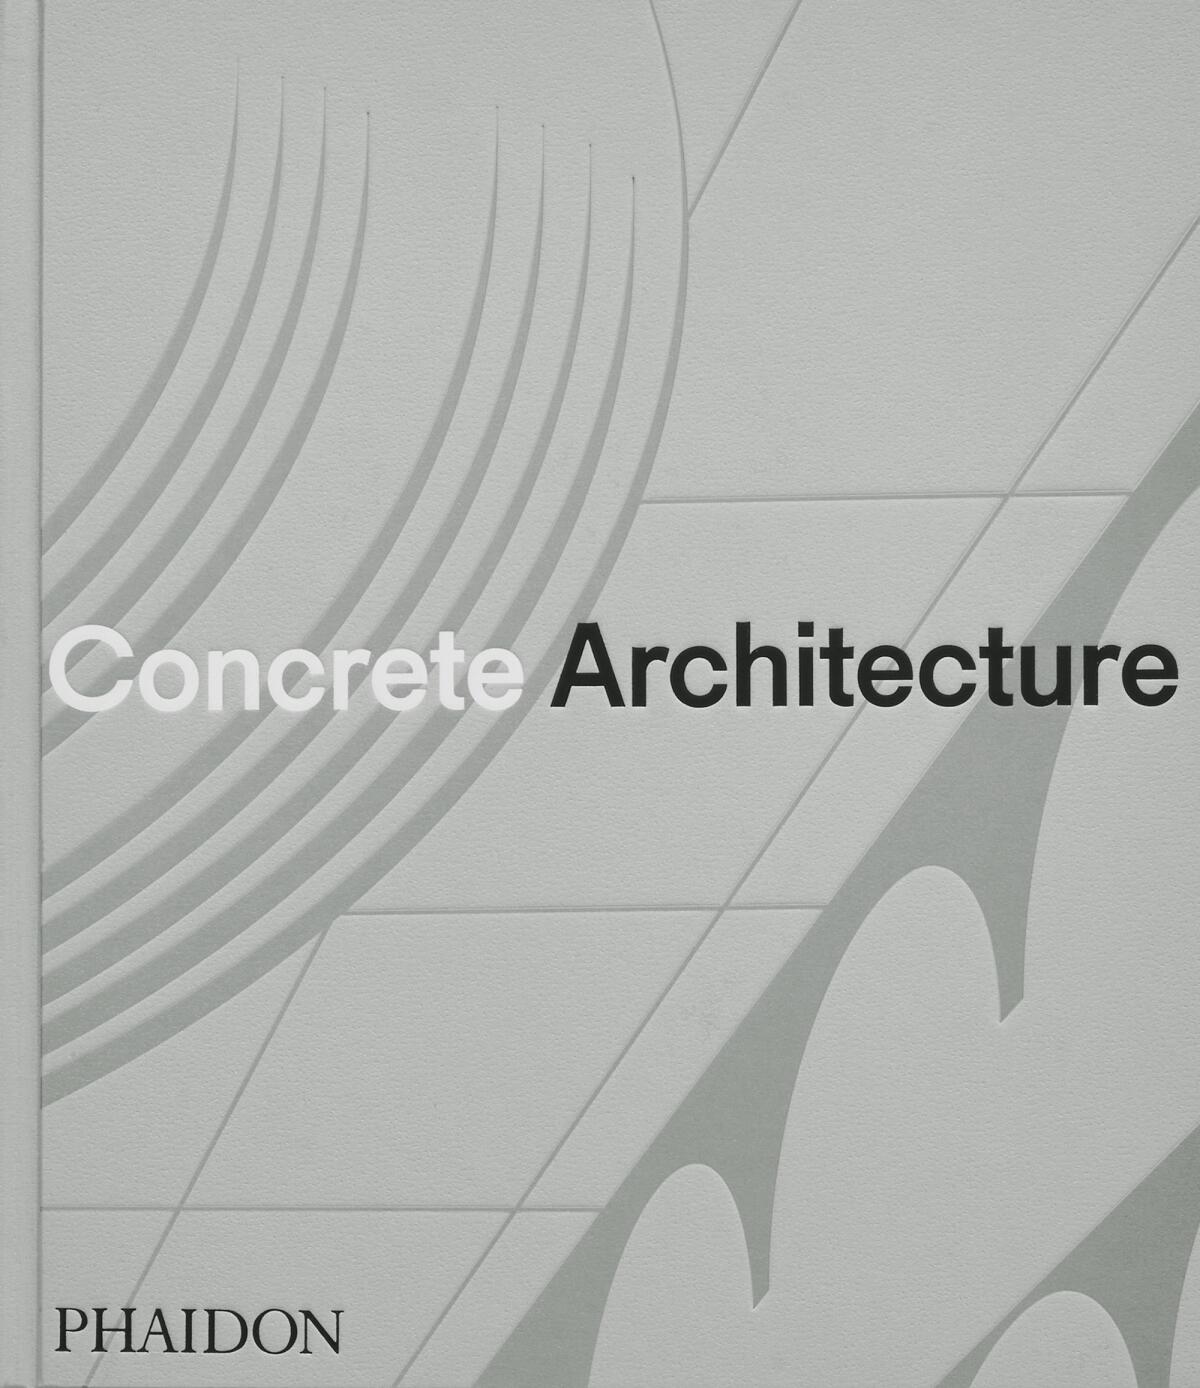 The cover of "Concrete Architecture," with the title and publisher's name overlaying a gray geometric design.